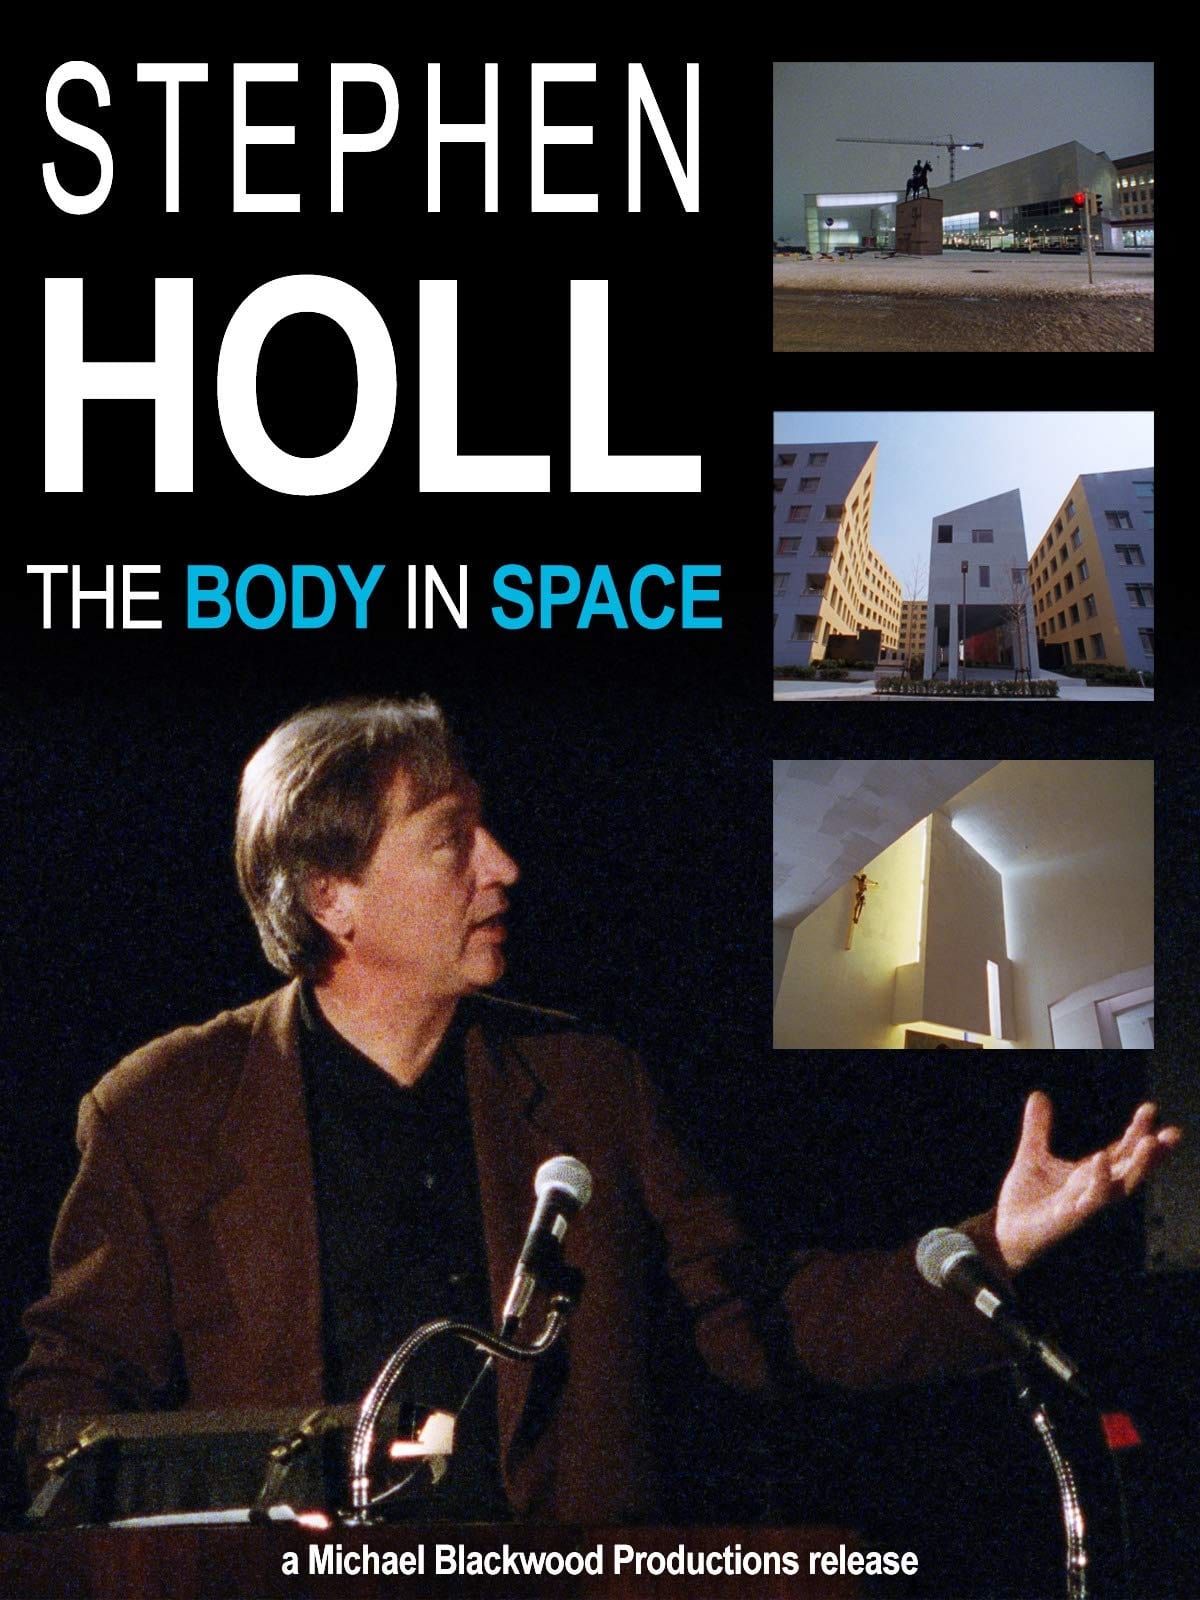 Steven Holl: The Body in Space